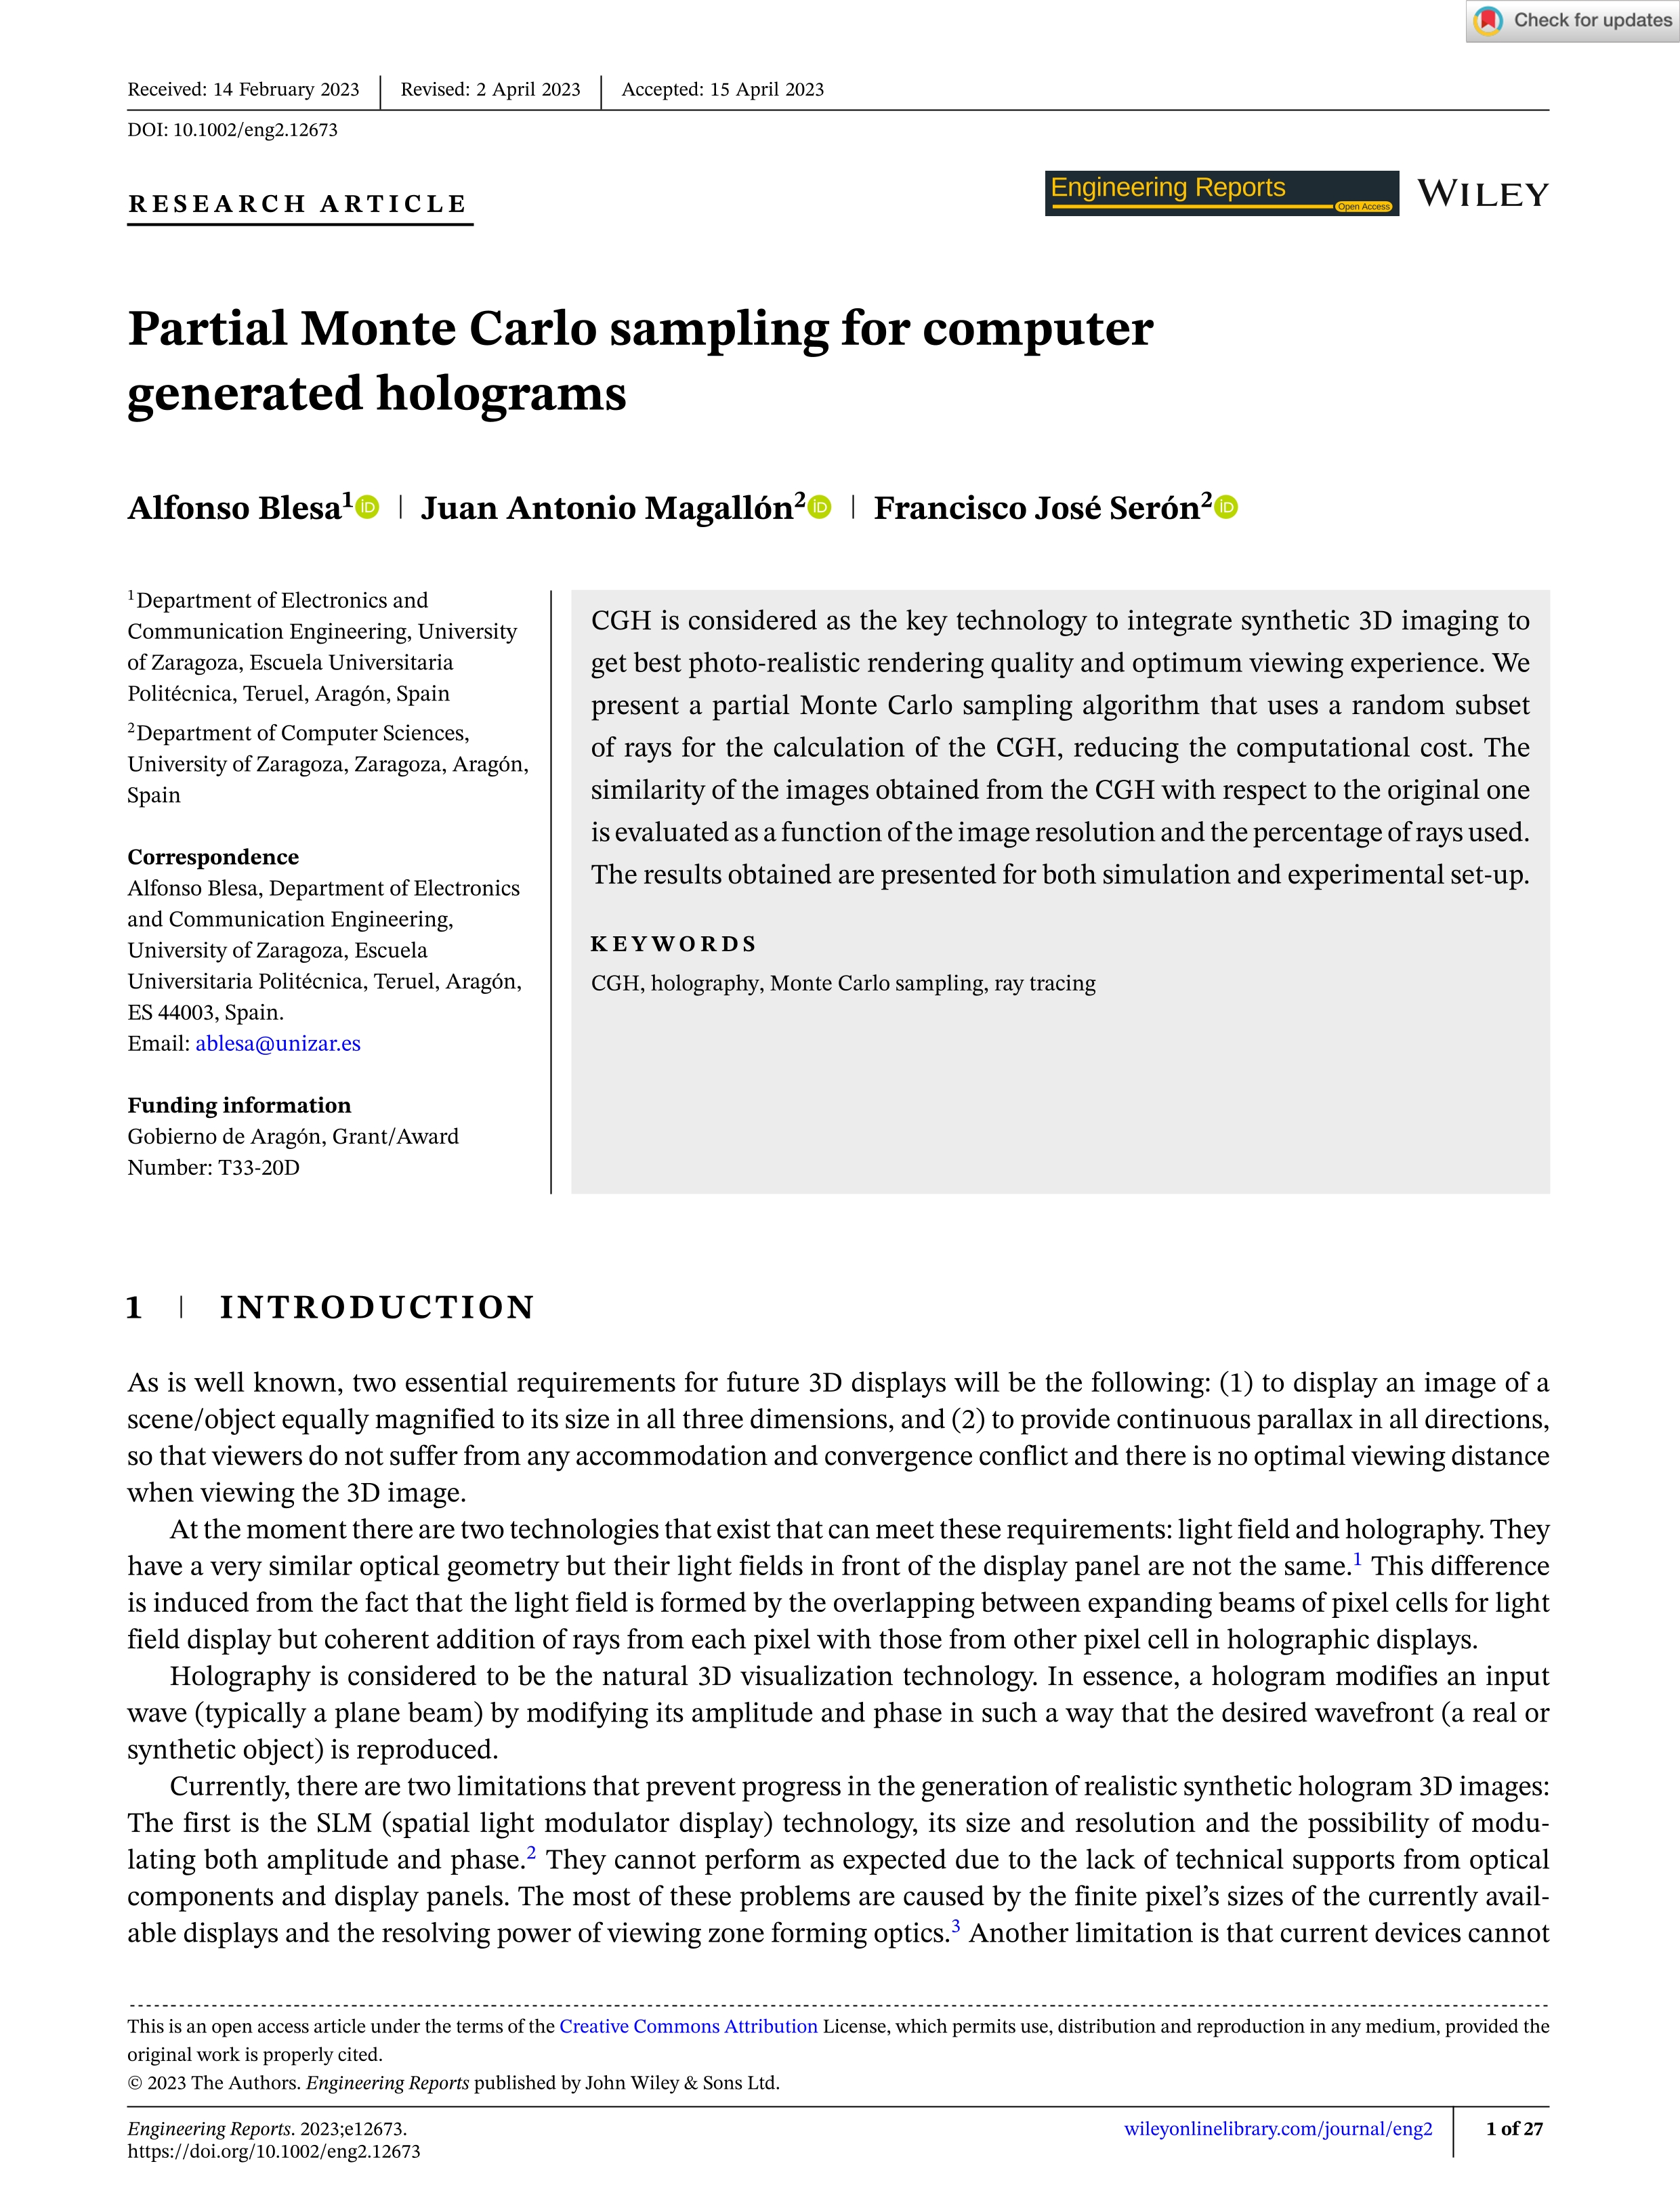 Partial Monte Carlo sampling for computer generated holograms